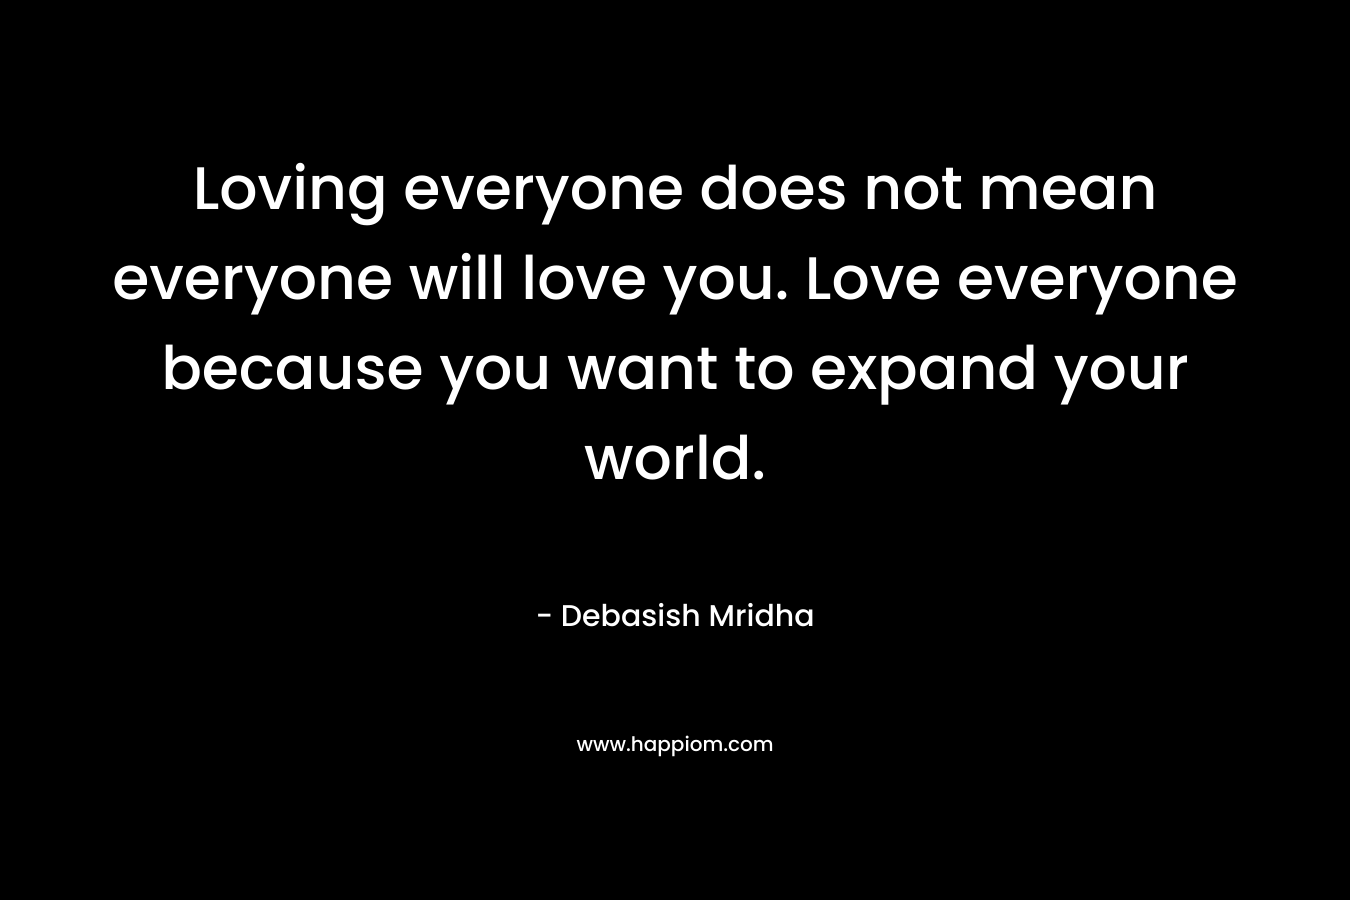 Loving everyone does not mean everyone will love you. Love everyone because you want to expand your world.